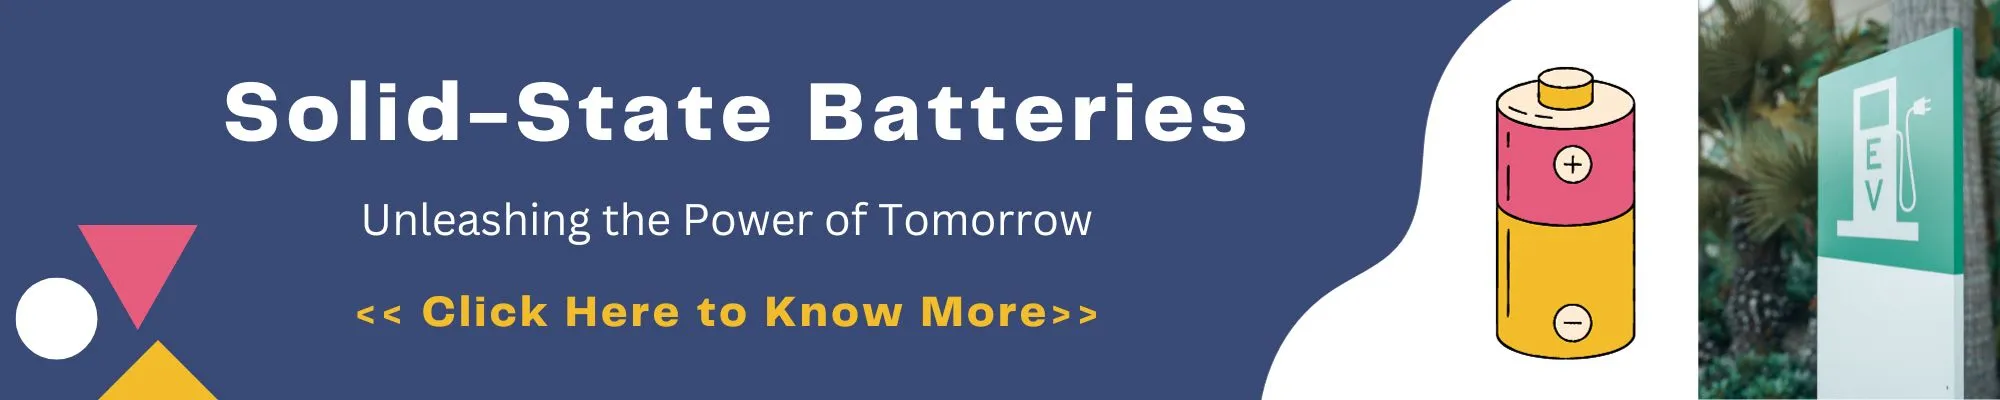 Solid-State-Batteries-patent-research